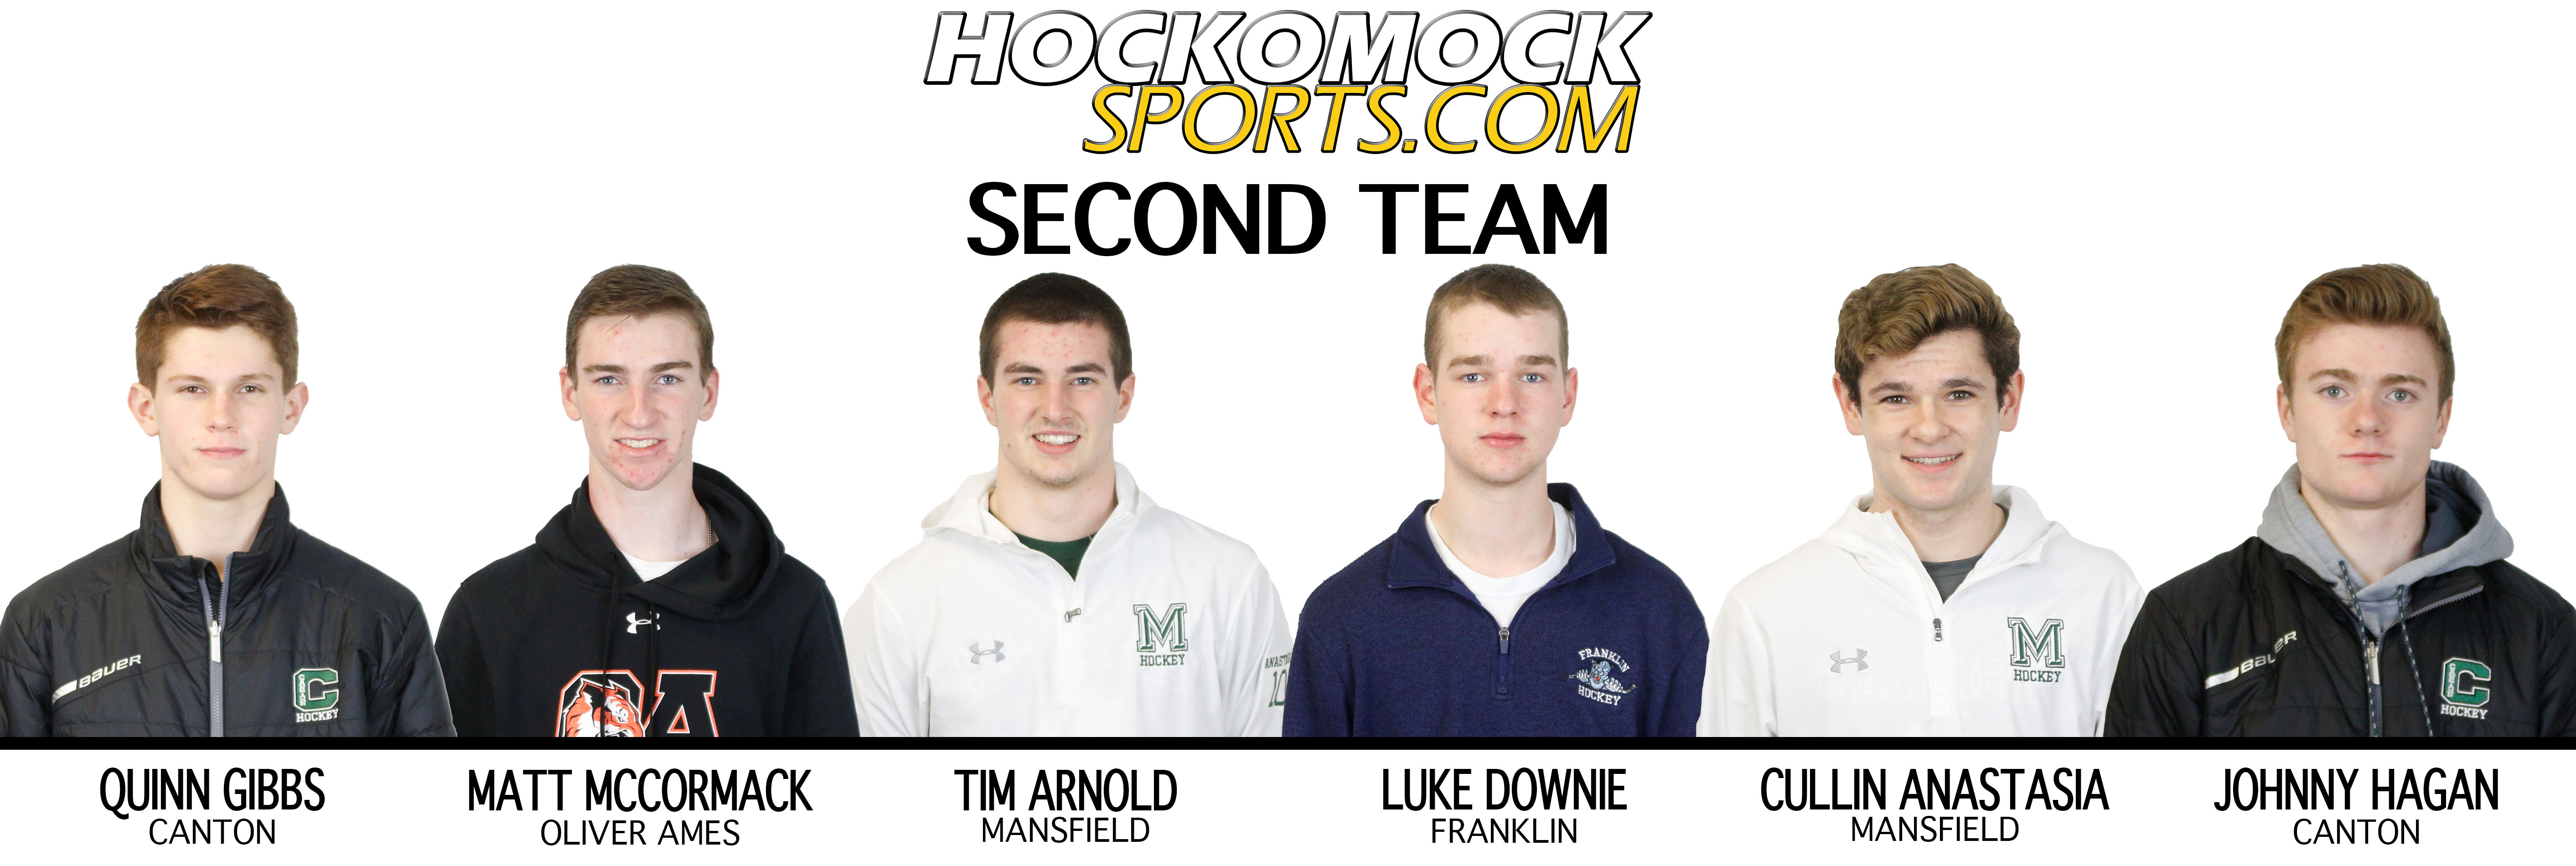 Luke Downie – Franklin was recognized on the Second Team